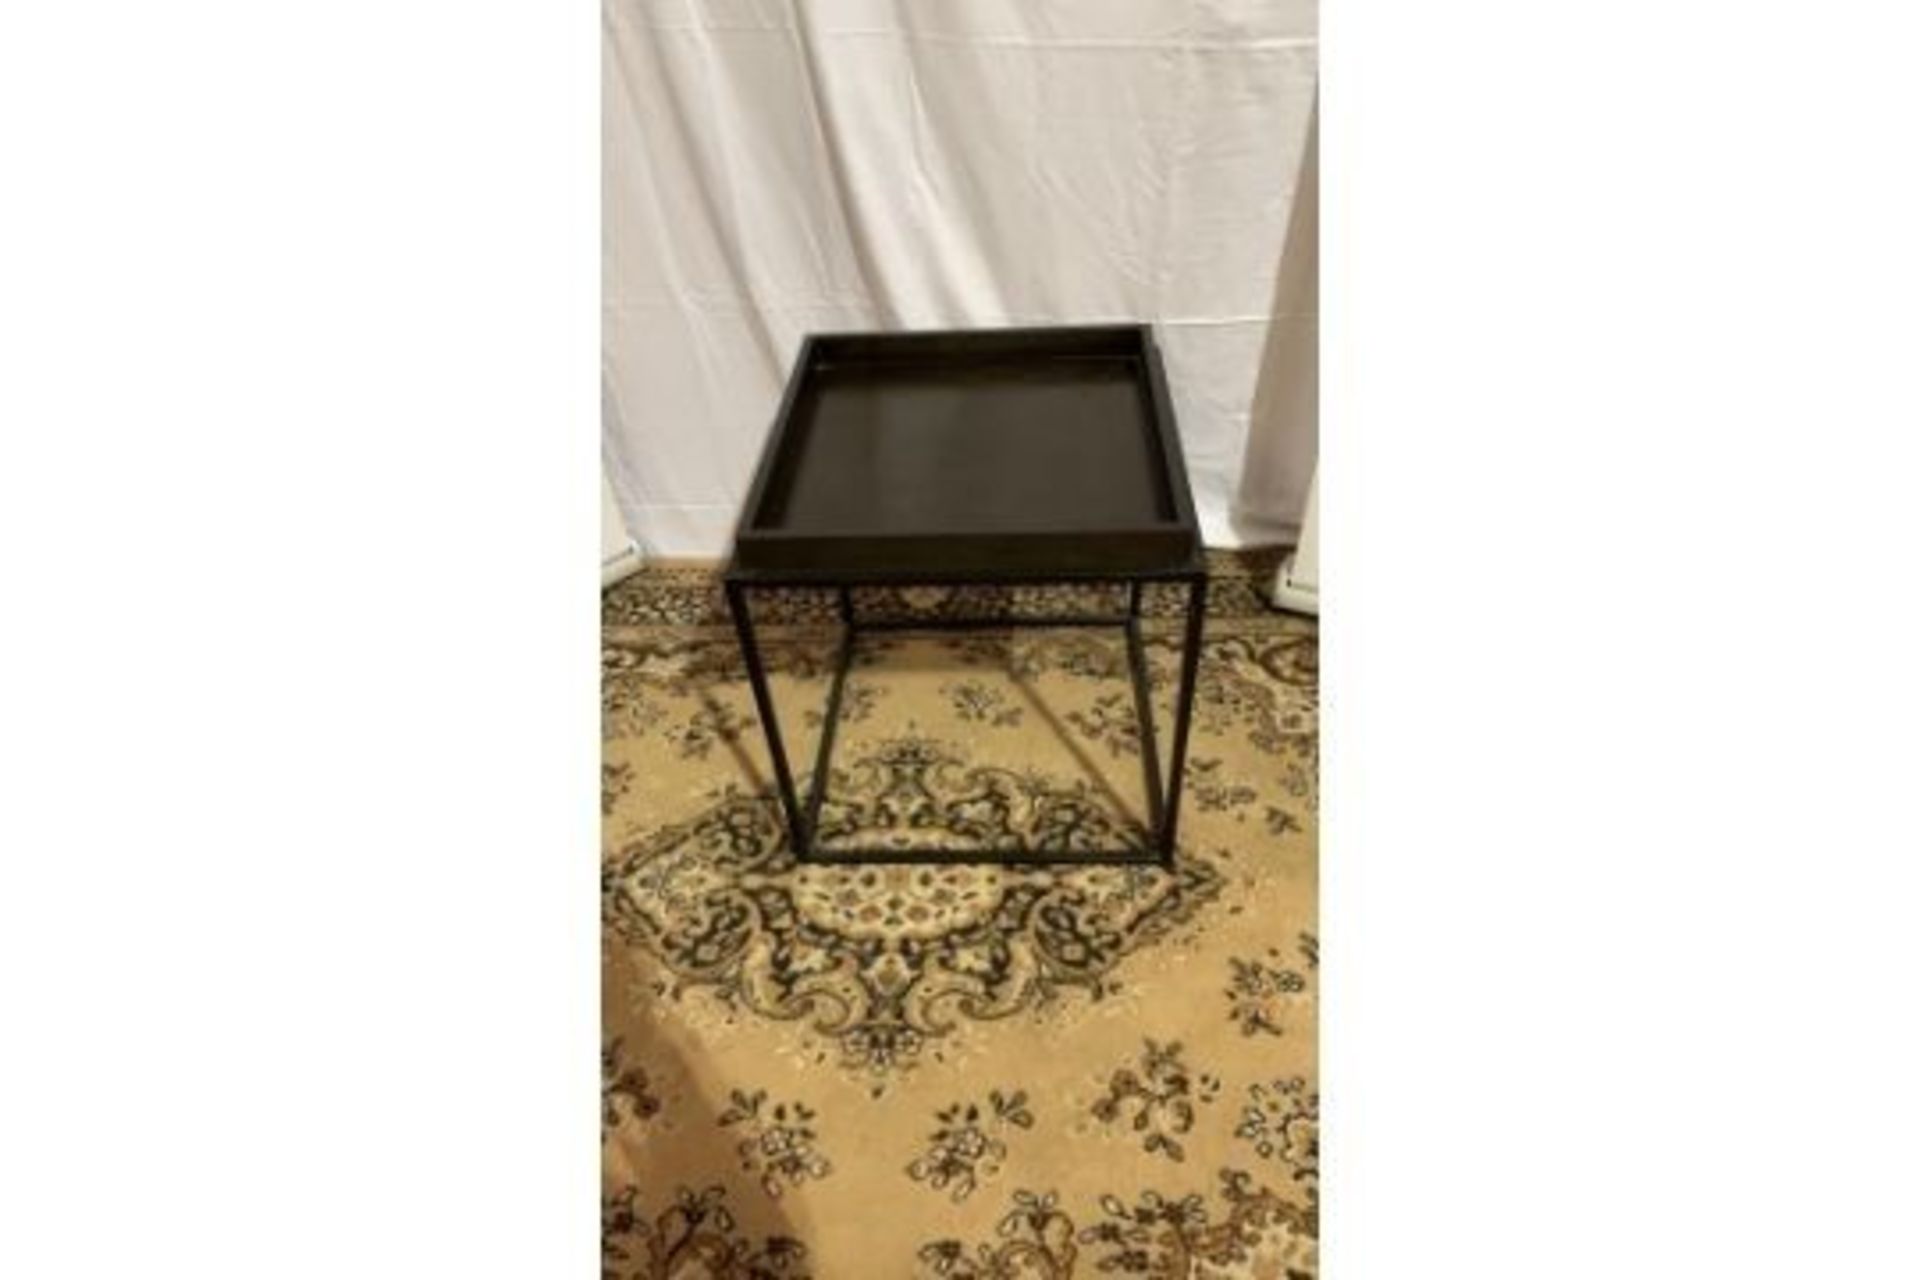 Forden Tray Side Table Black The Simple Angular Black Metal Frame Allows A Clear View Of The Floor